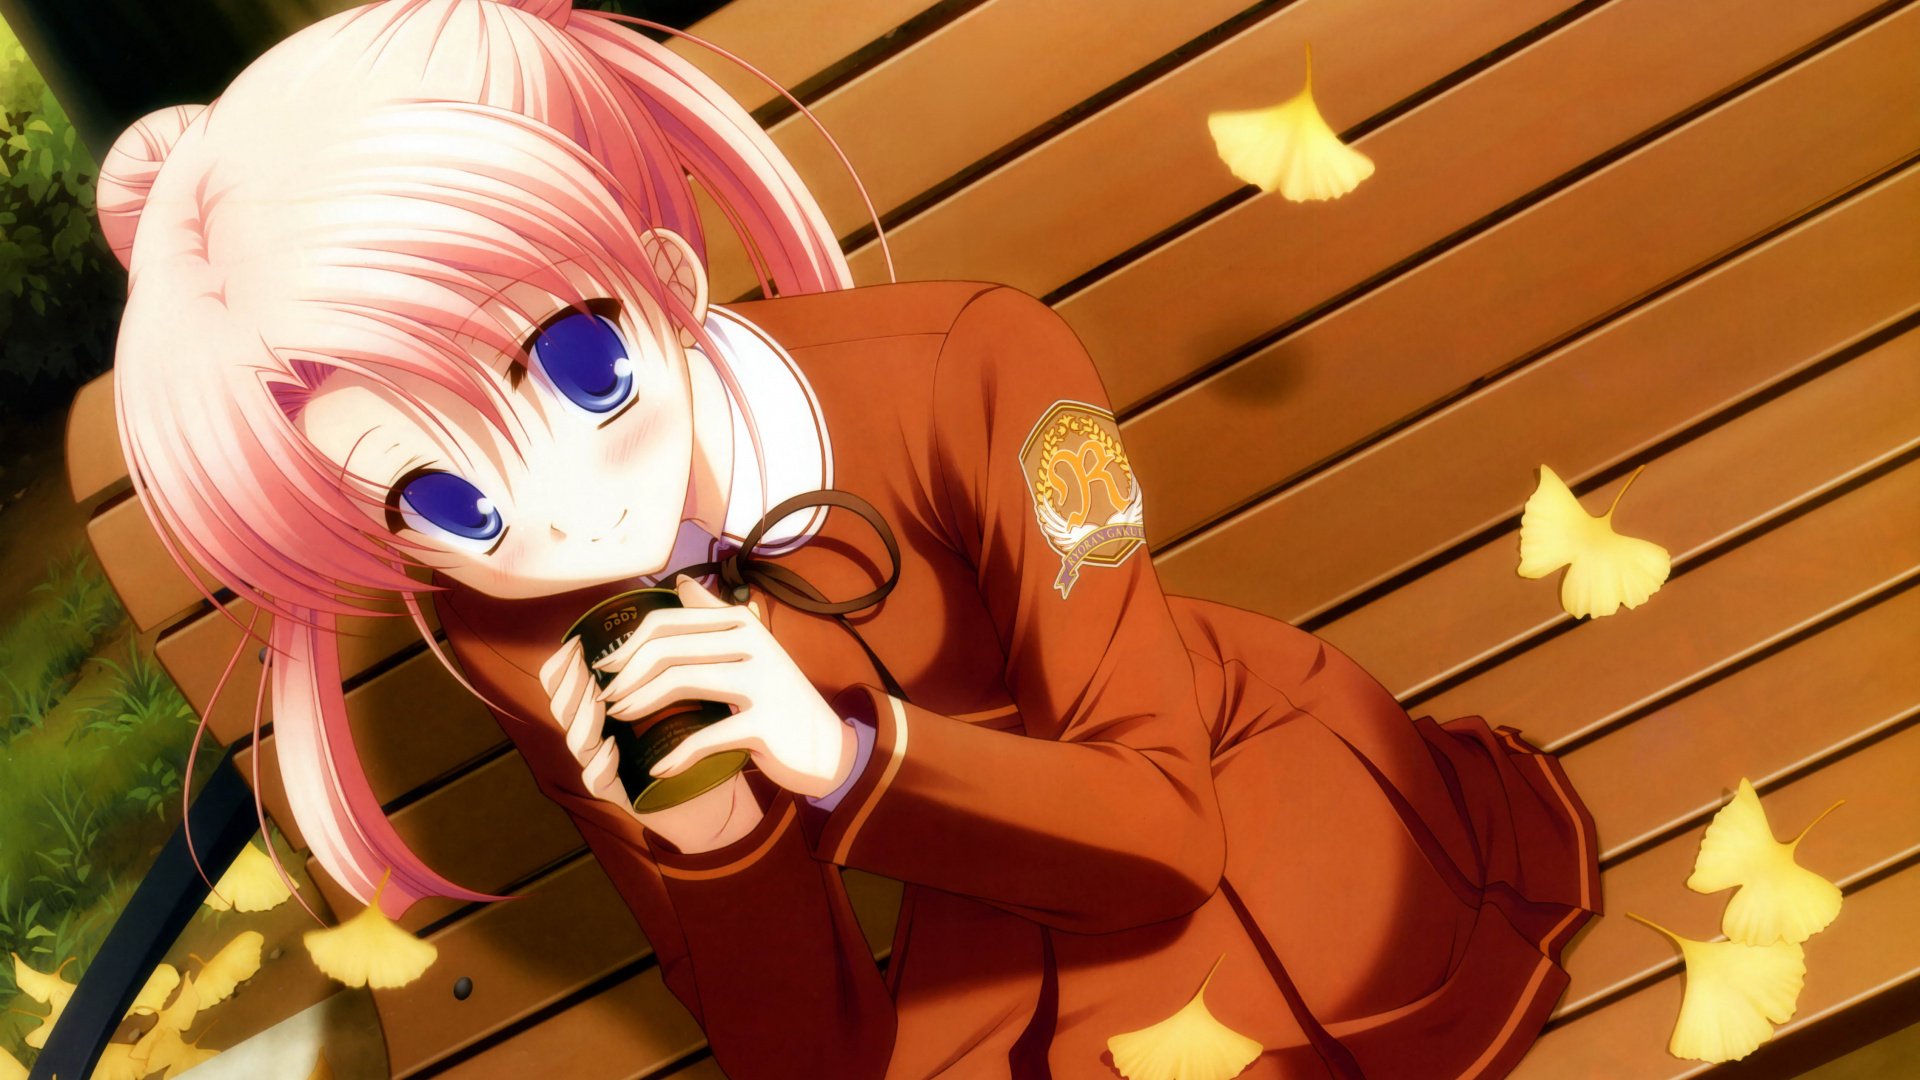 Girl in Brown Long Sleeve Shirt Anime Character. Wallpaper in 1920x1080 Resolution